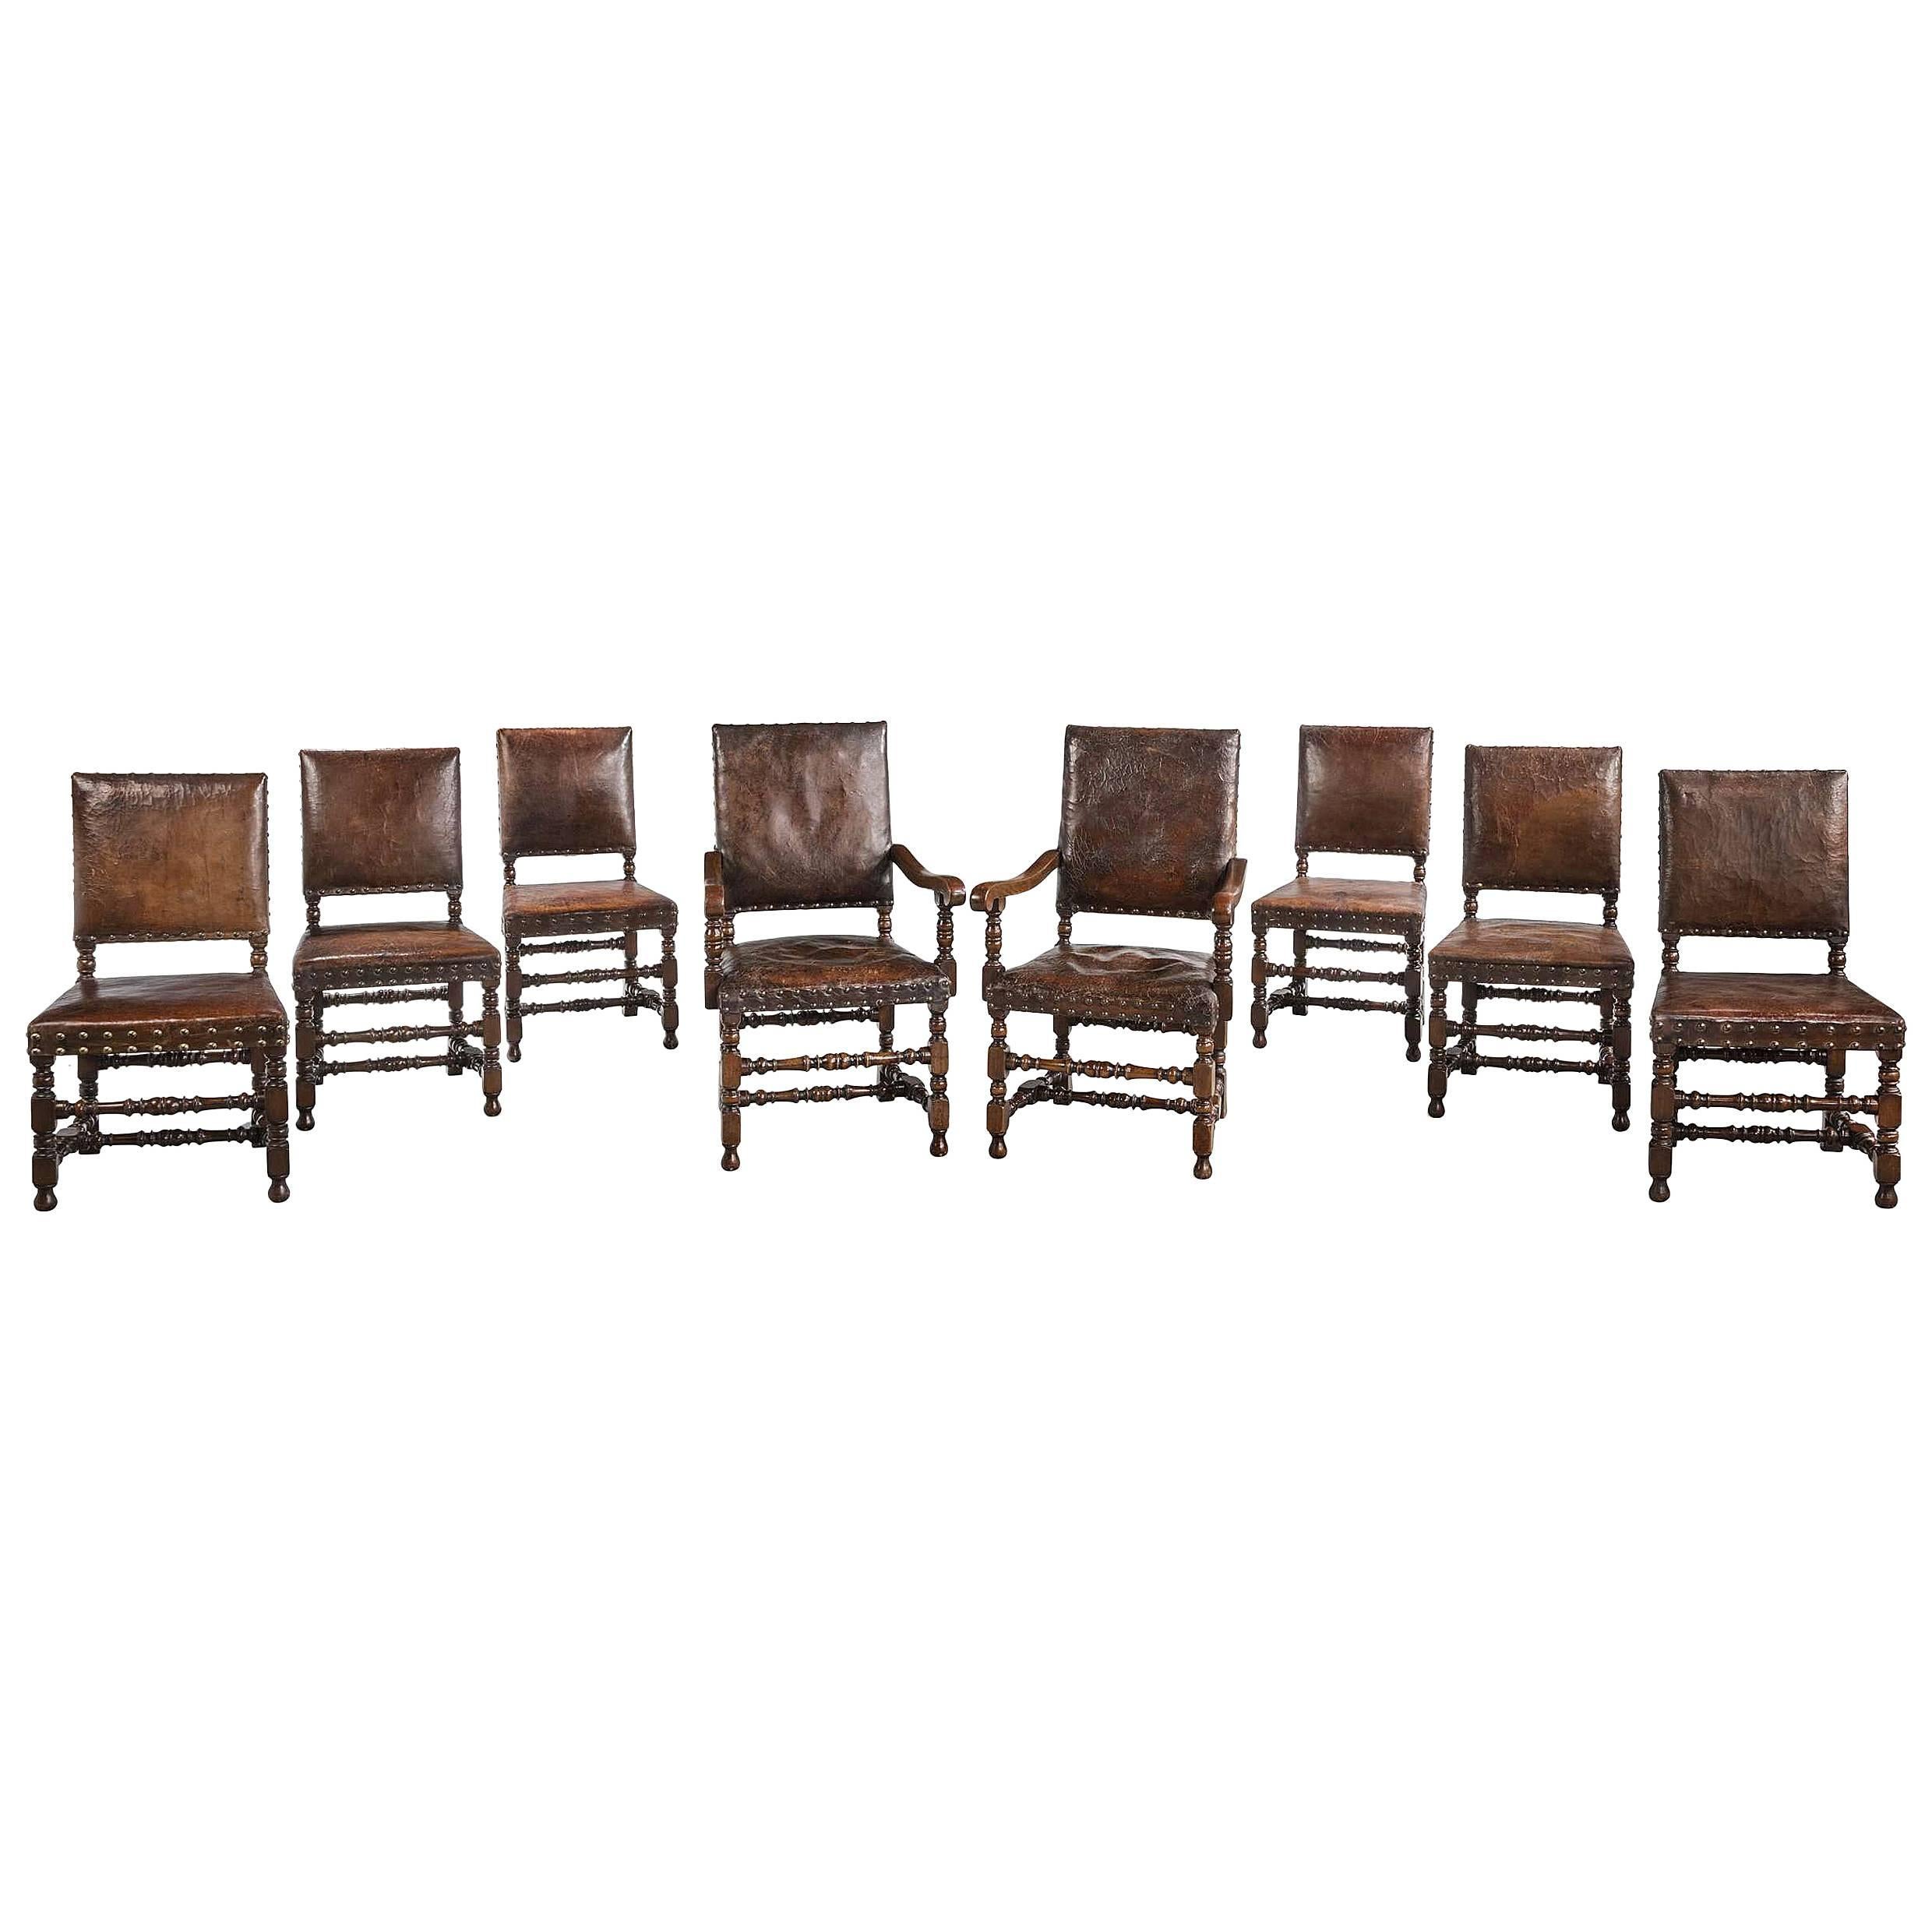 Set of Eight (Six plus Two) 17th Century Design Oak Chairs